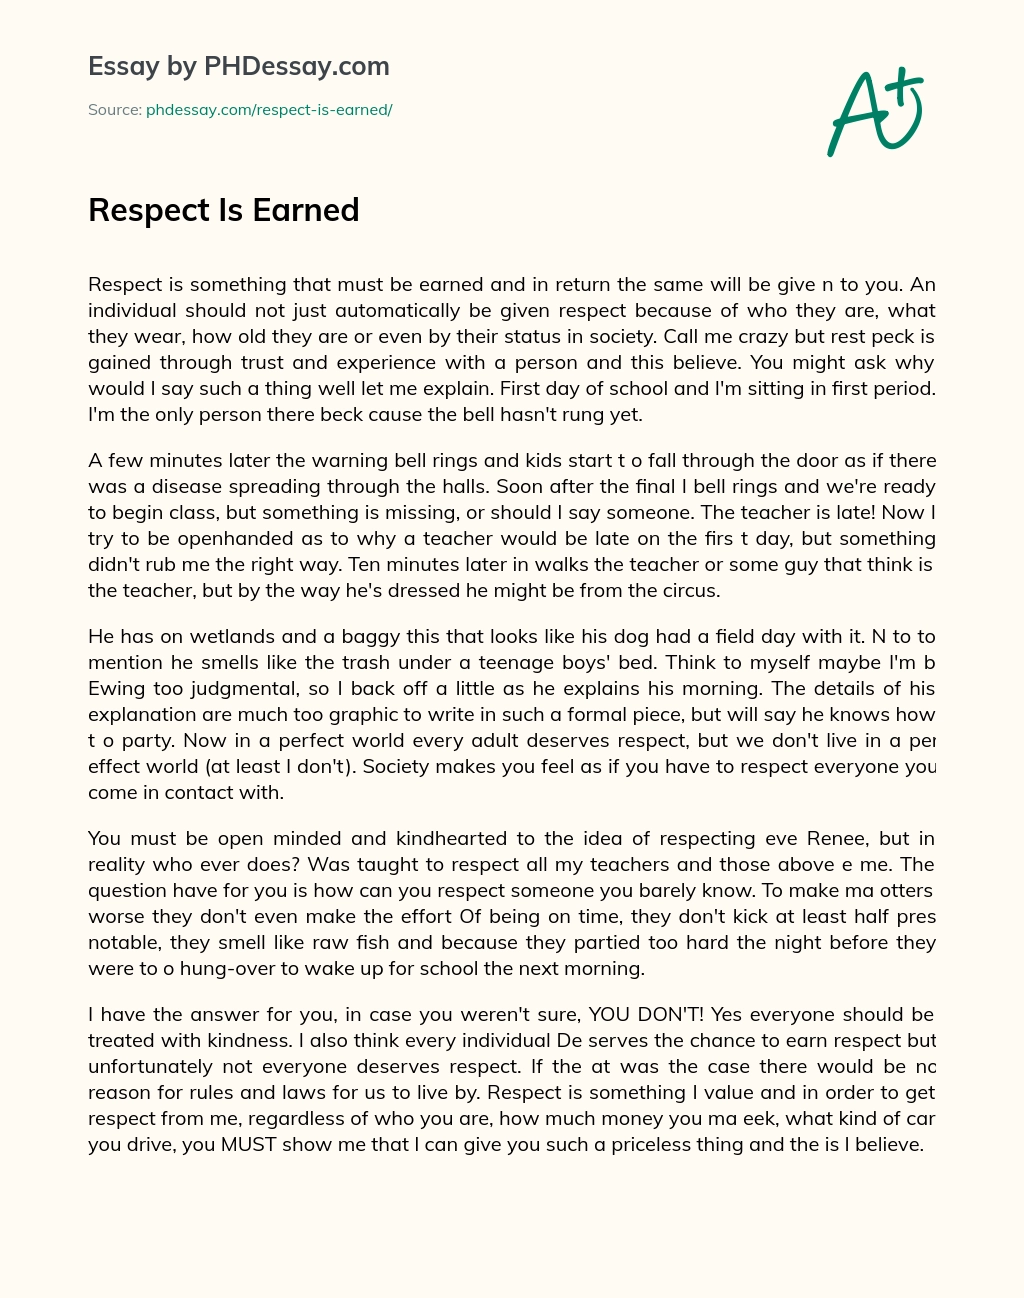 Respect Is Earned essay